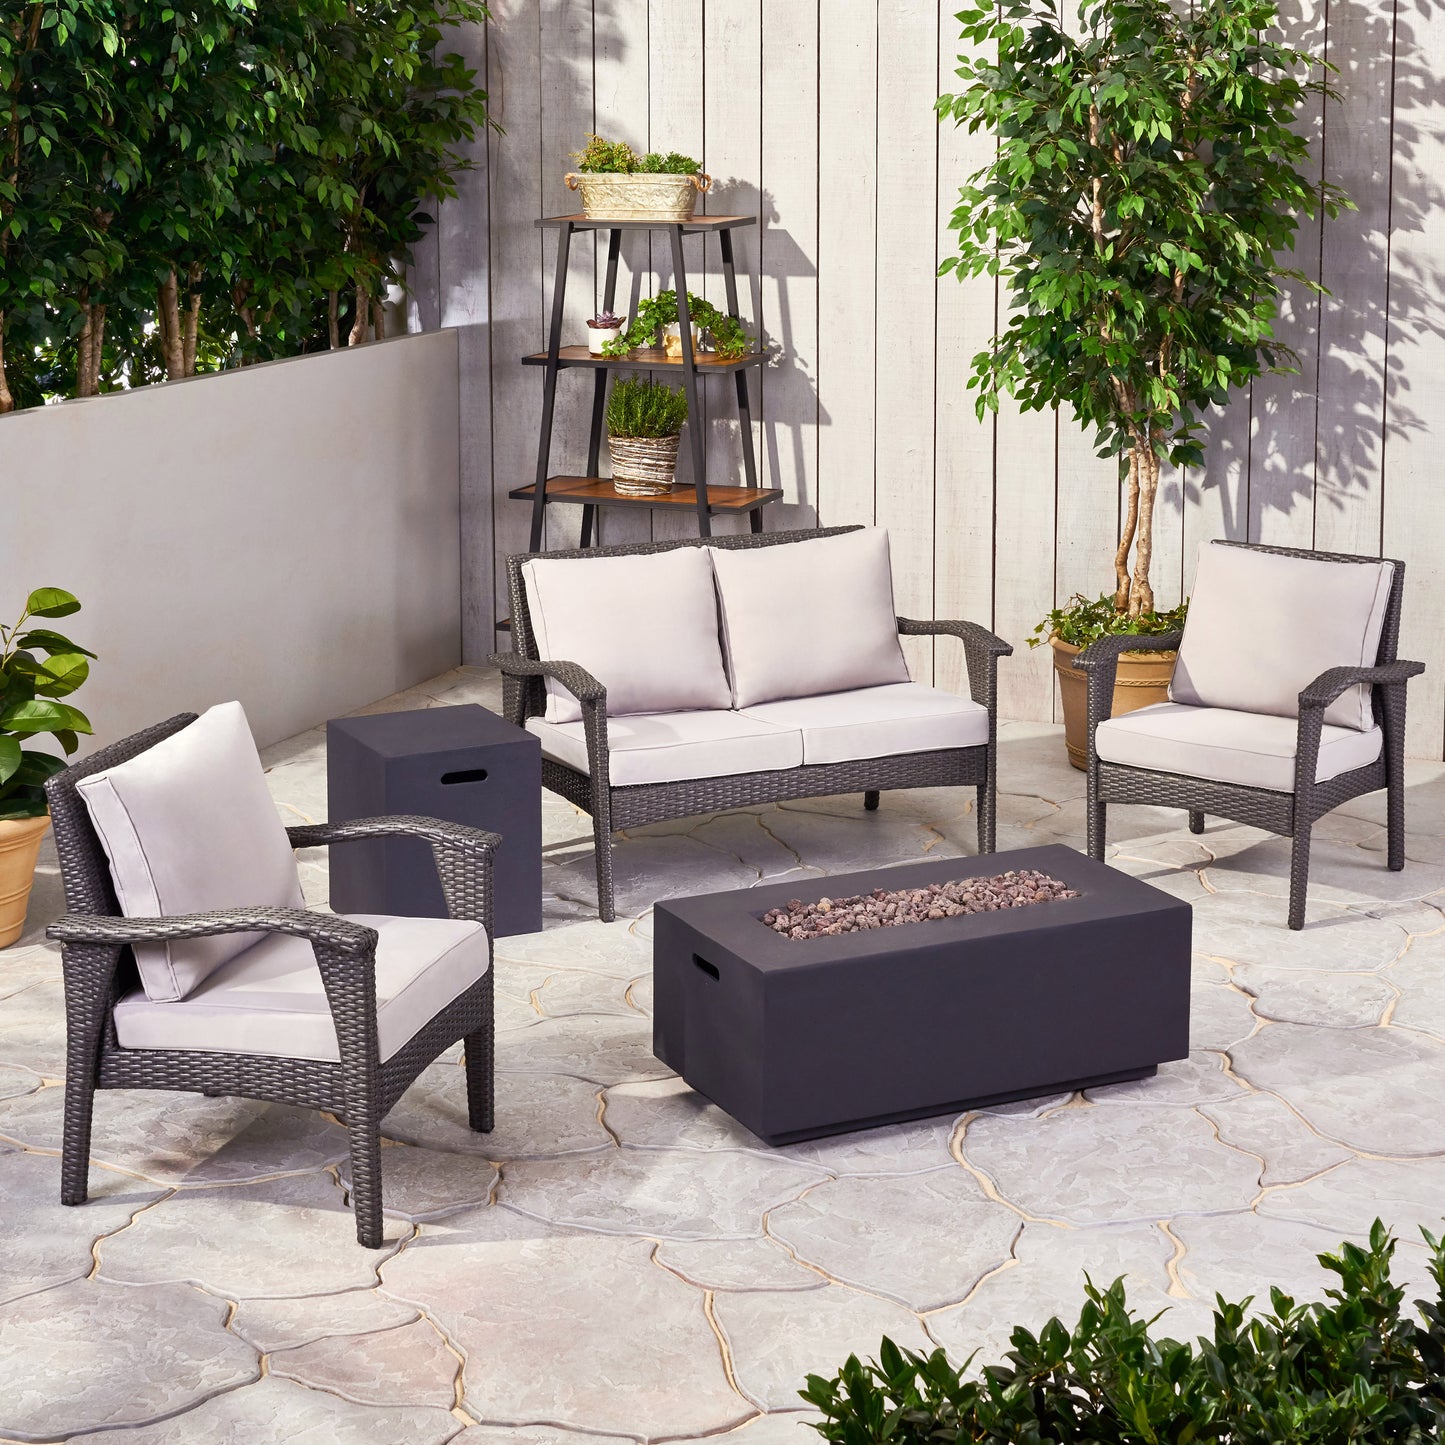 Mckynzie Outdoor 4 Seater Wicker Chat Set with Fire Pit